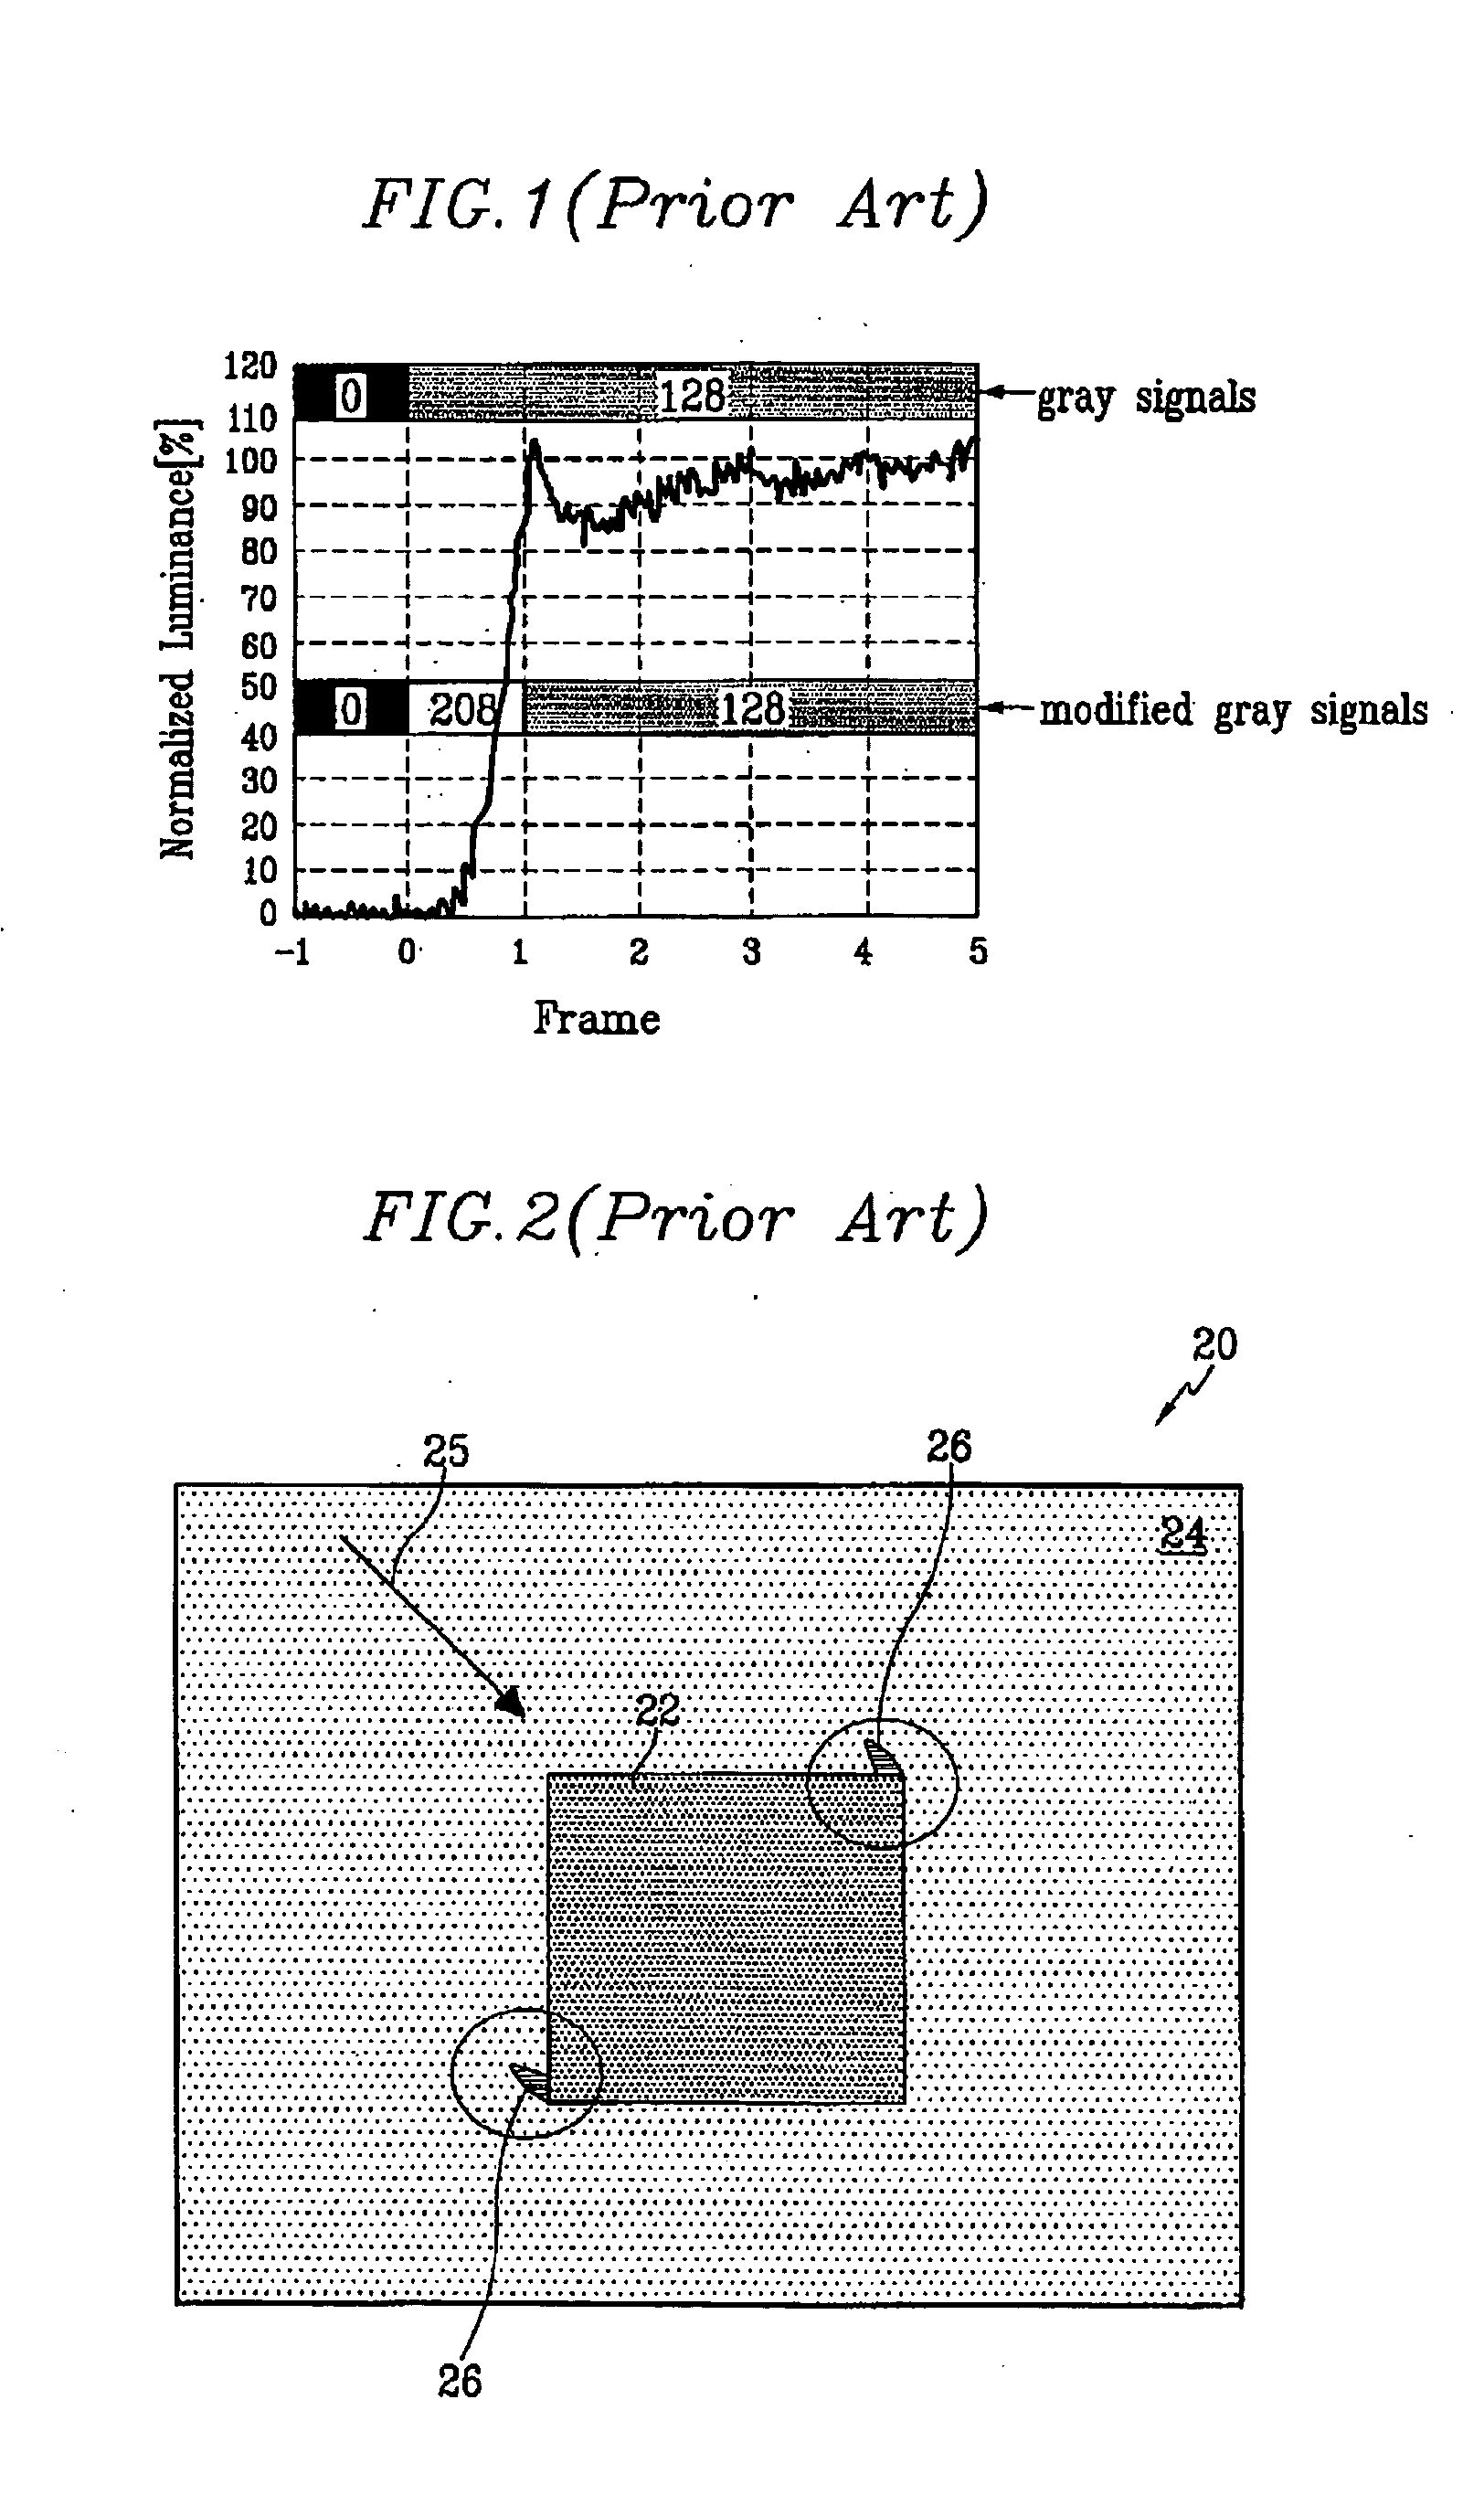 Modifying gray voltage signals in a display device